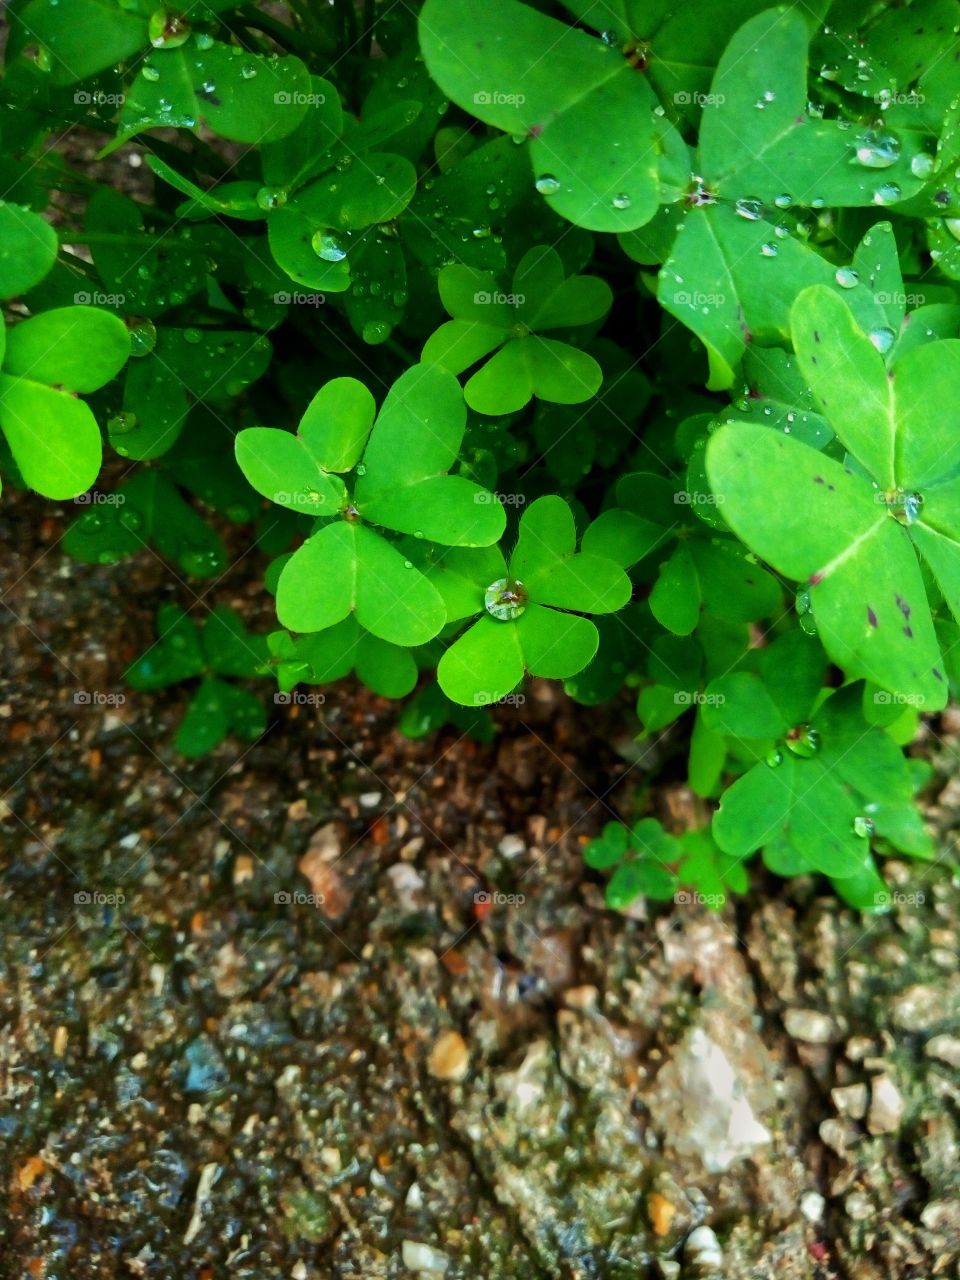 A natural and vibrant green makes these tiny clovers look greater in their essence. Drops of water from the latest rain can be found on the leaves.